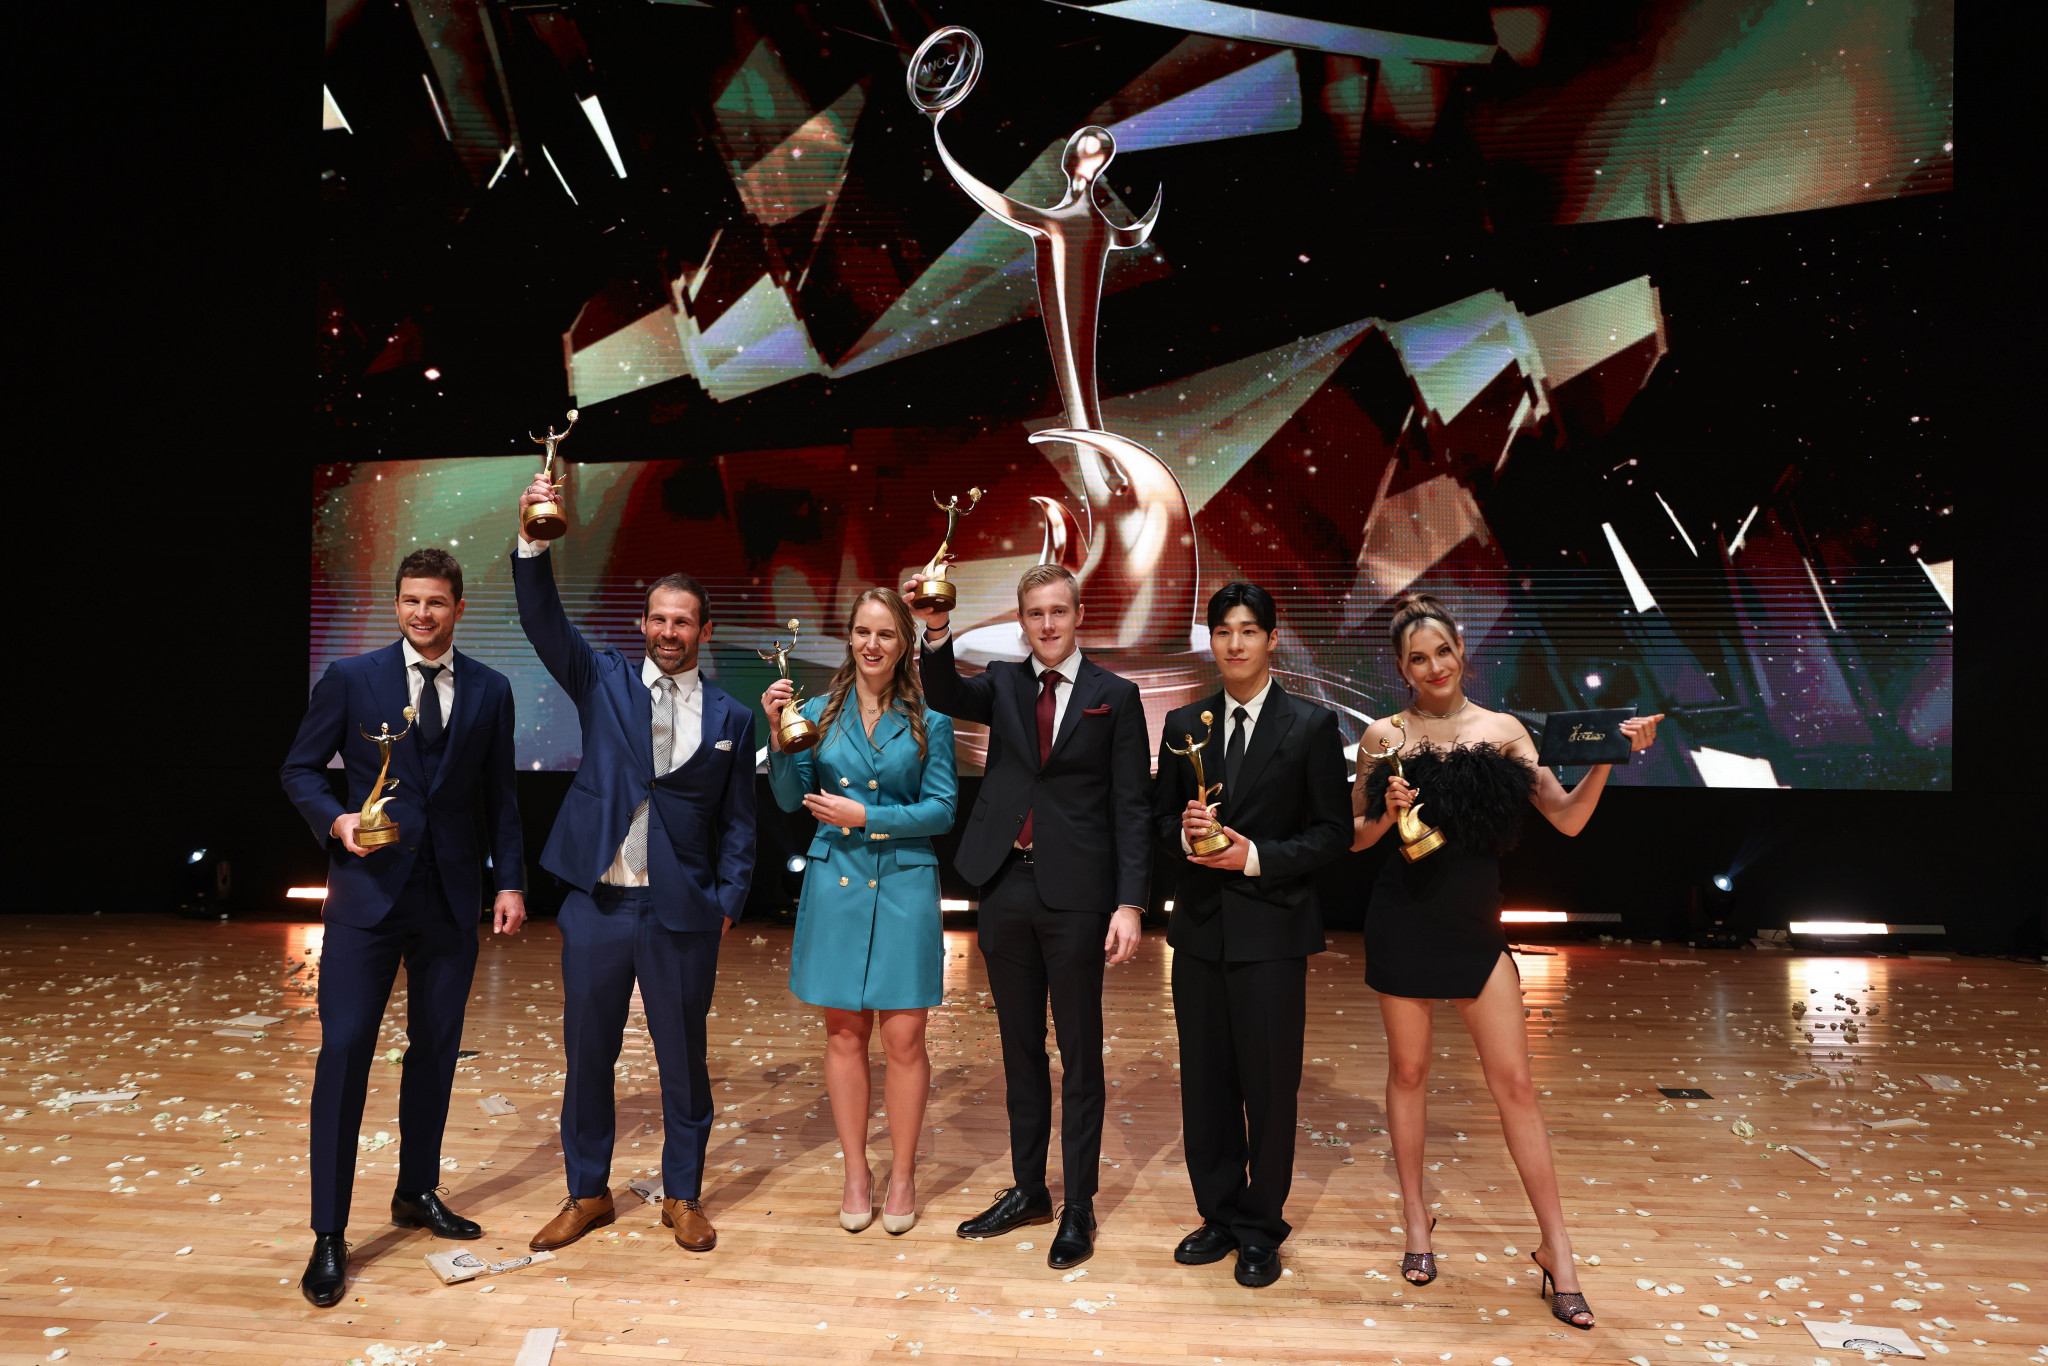 Award winners show off their trophies at the end of the Association of National Olympic Committees Awards ©ANOC